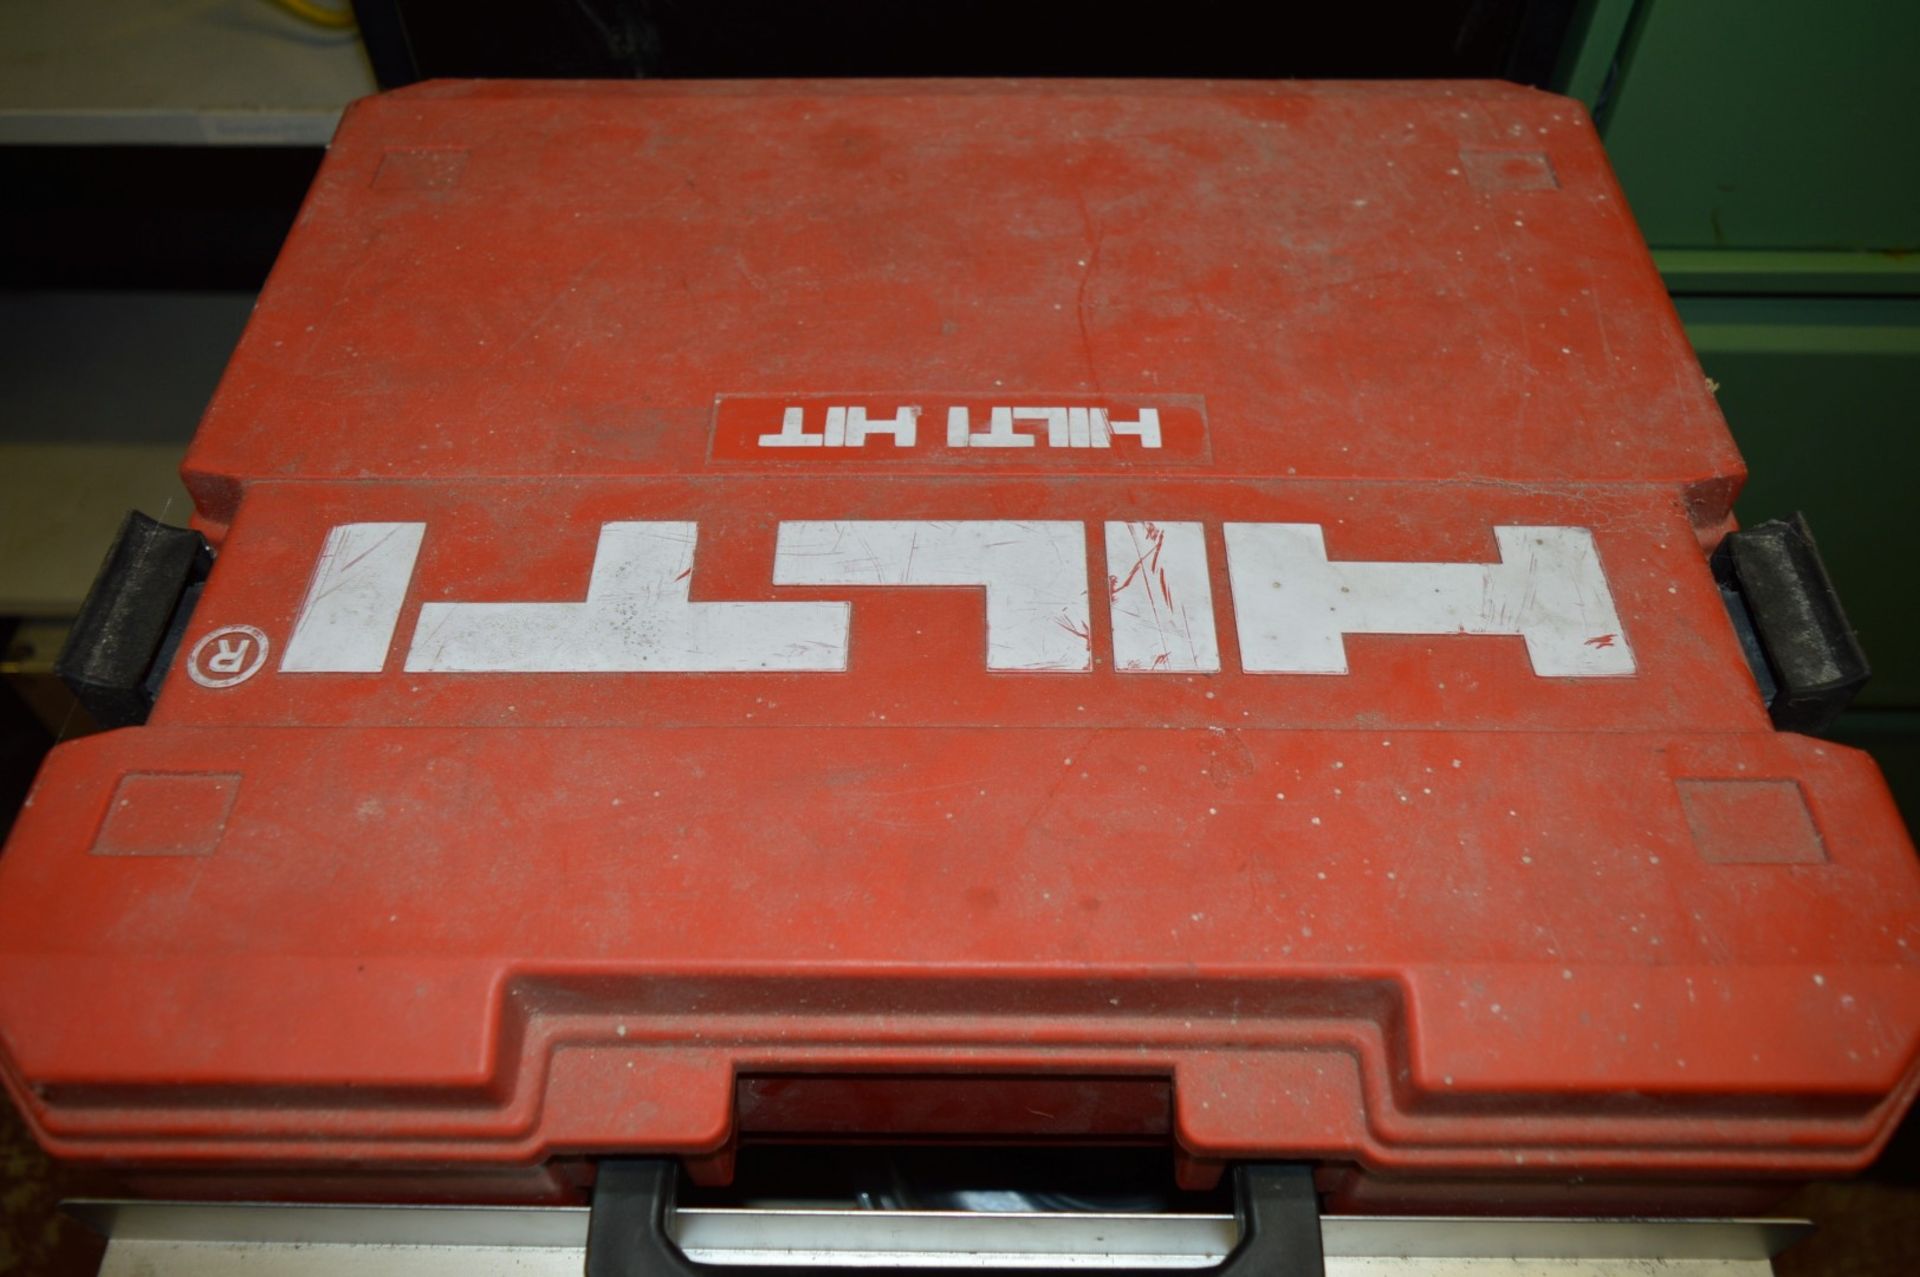 1 x Hilti MD2000 Manual HIT Adhesive Dispenser With Case, Accessories and HIT-HY 150 Pack - Ref: - Image 2 of 7